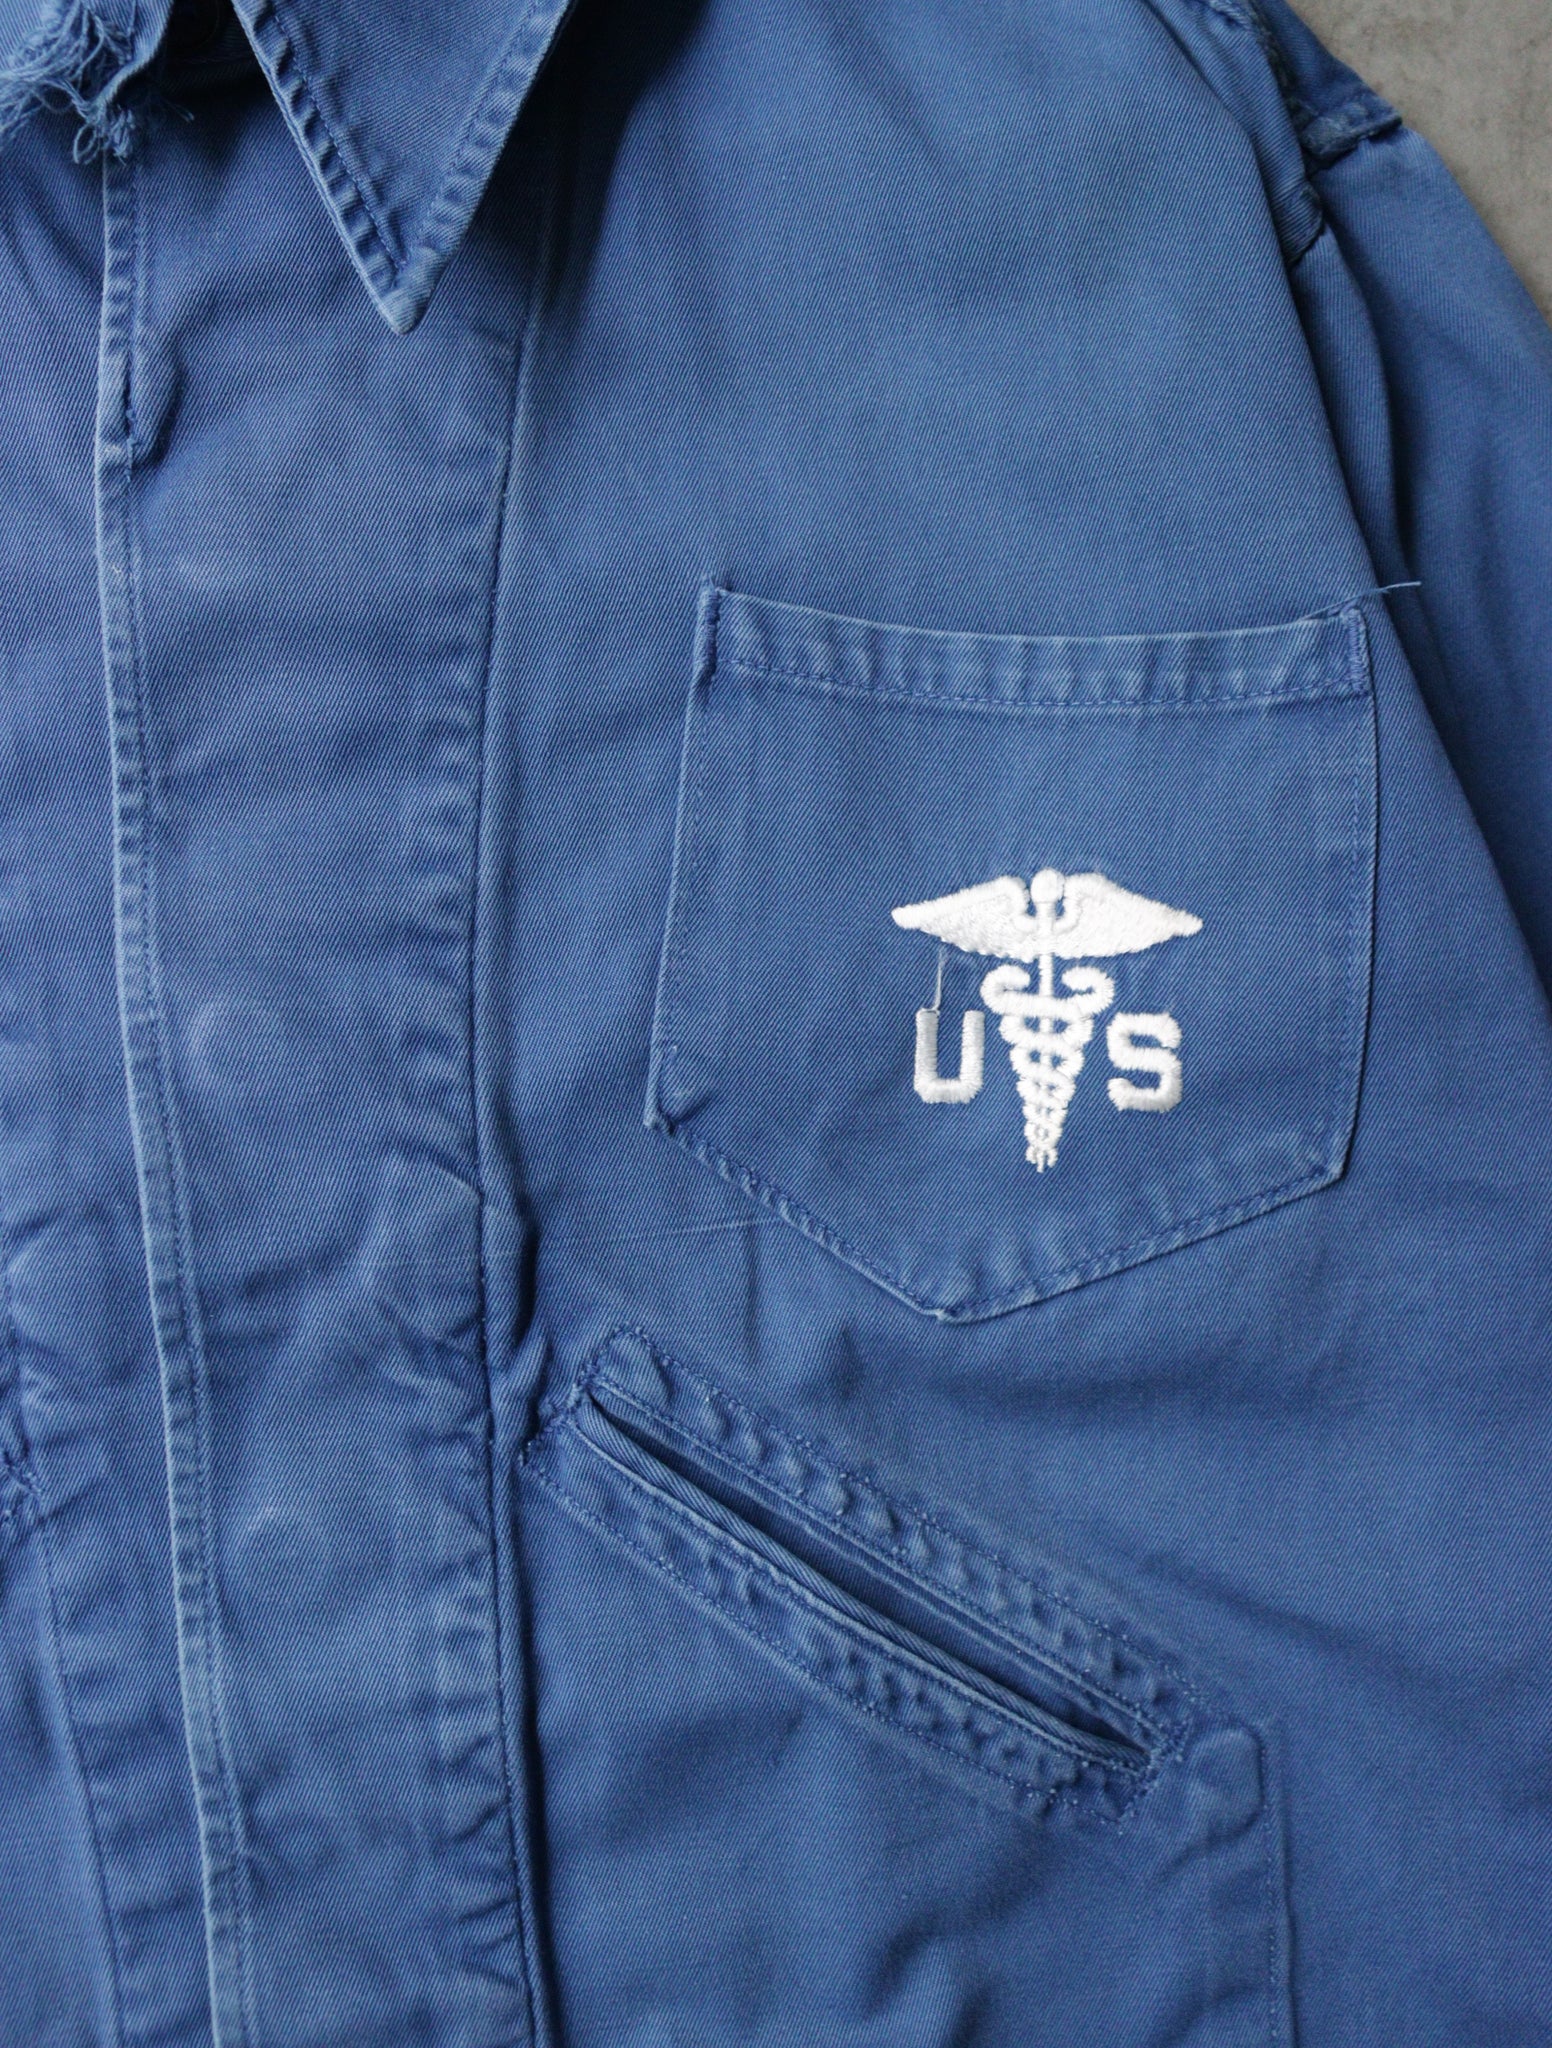 1950S USN FADED MILITARY MEDICAL WORK JACKET